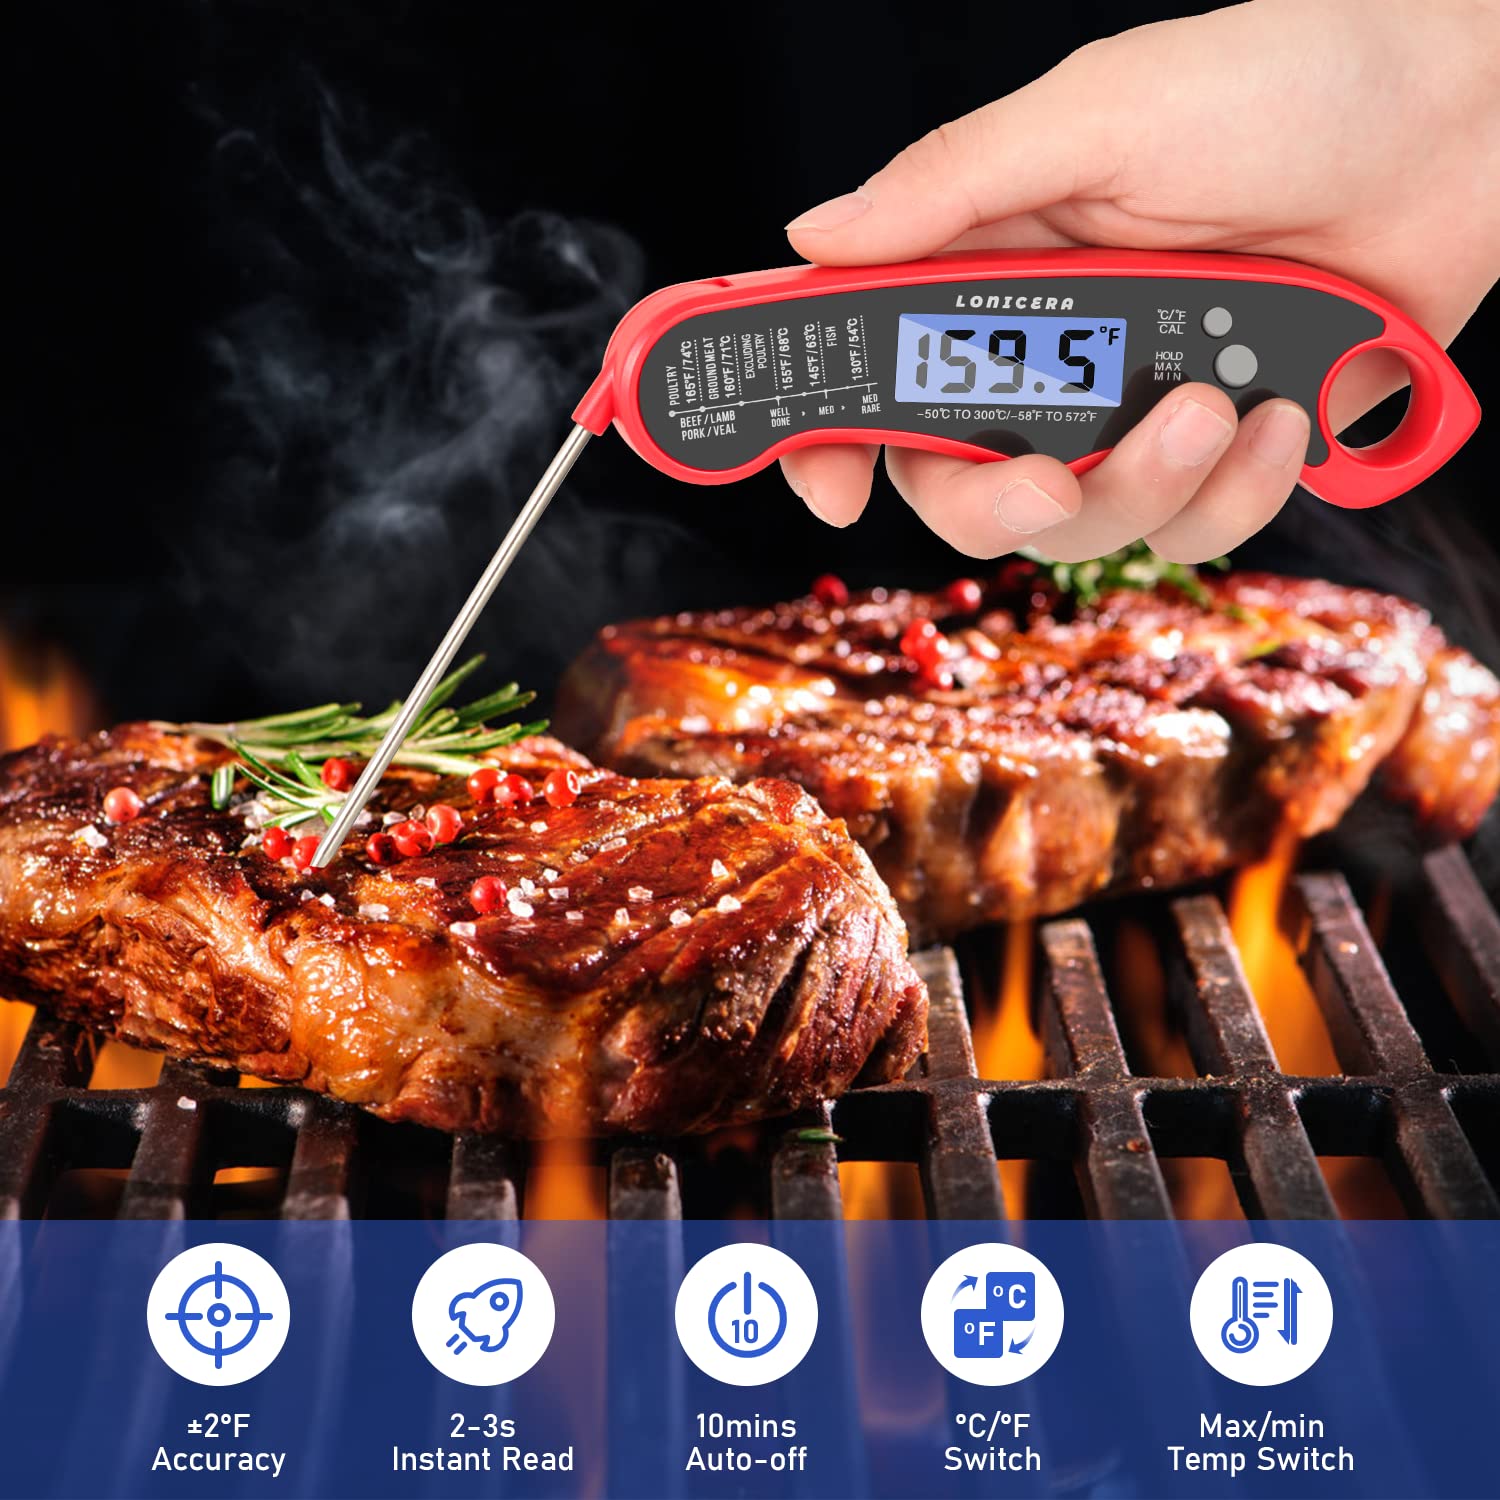 Lonicera Digital Meat Thermometer for Food Cooking. Waterproof  Instant Read for Kitchen Baking, BBQ. with Foldable Probe, Backlight  Calibration (Red)